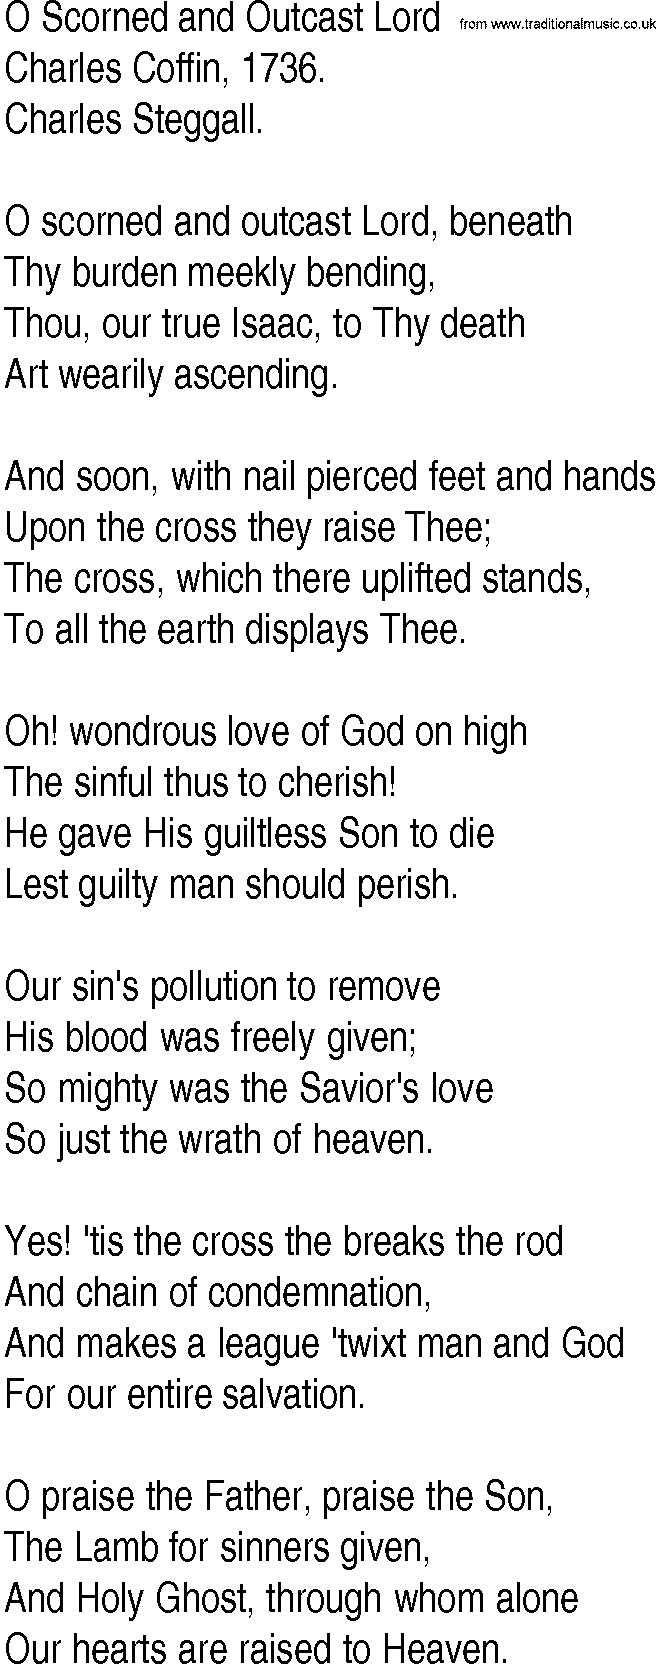 Hymn and Gospel Song: O Scorned and Outcast Lord by Charles Coffin lyrics